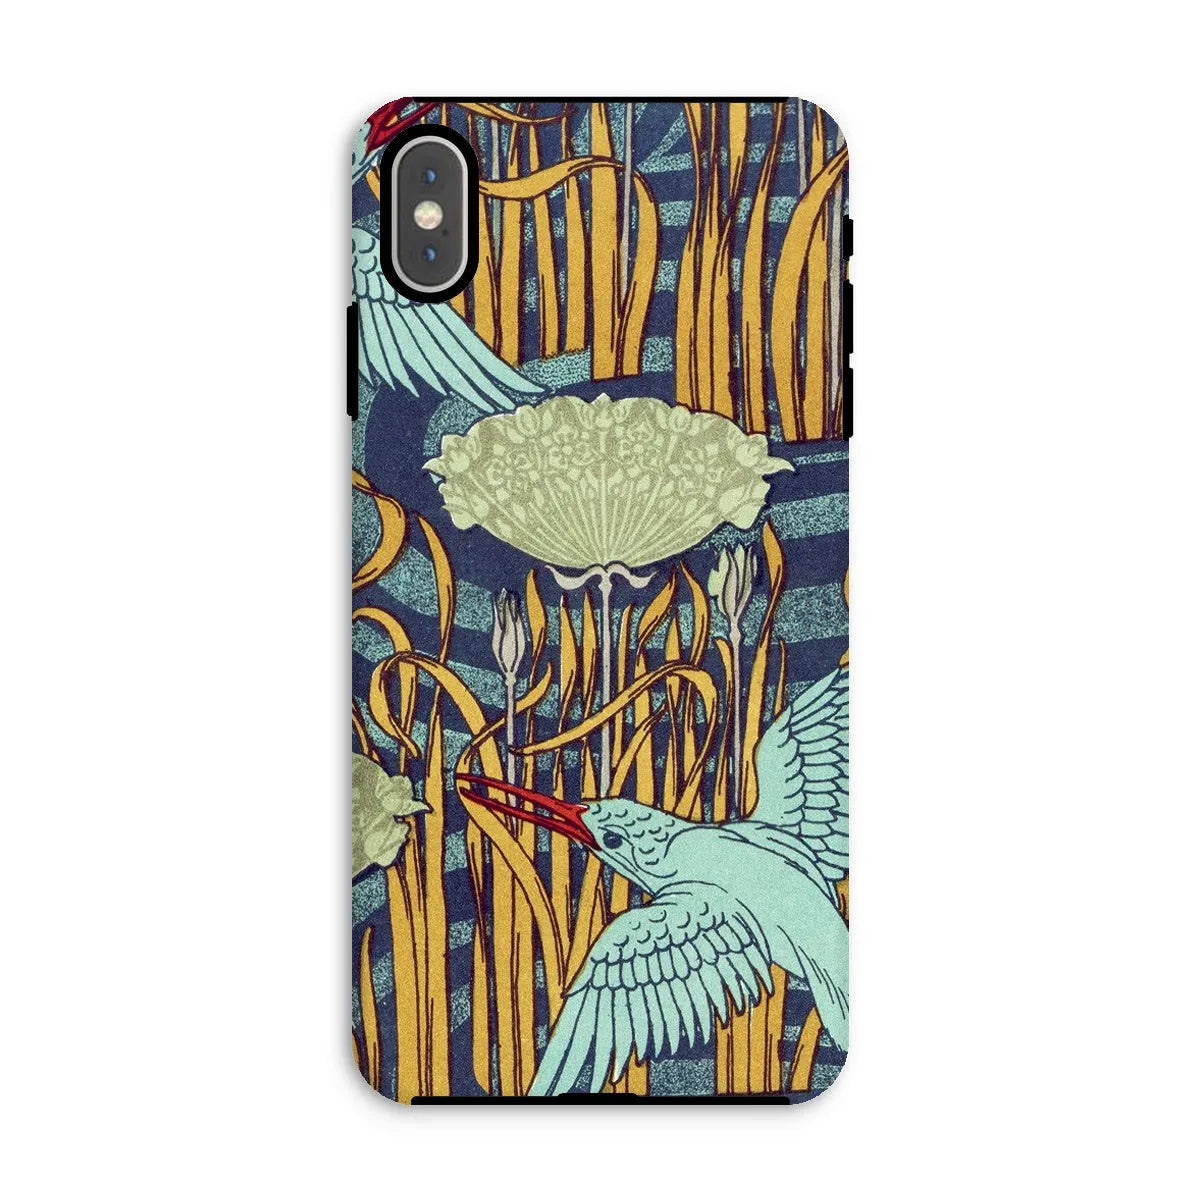 Kingfishers French Art Phone Case - Maurice Pillard Verneuil - Iphone Xs Max / Matte - Mobile Phone Cases - Aesthetic